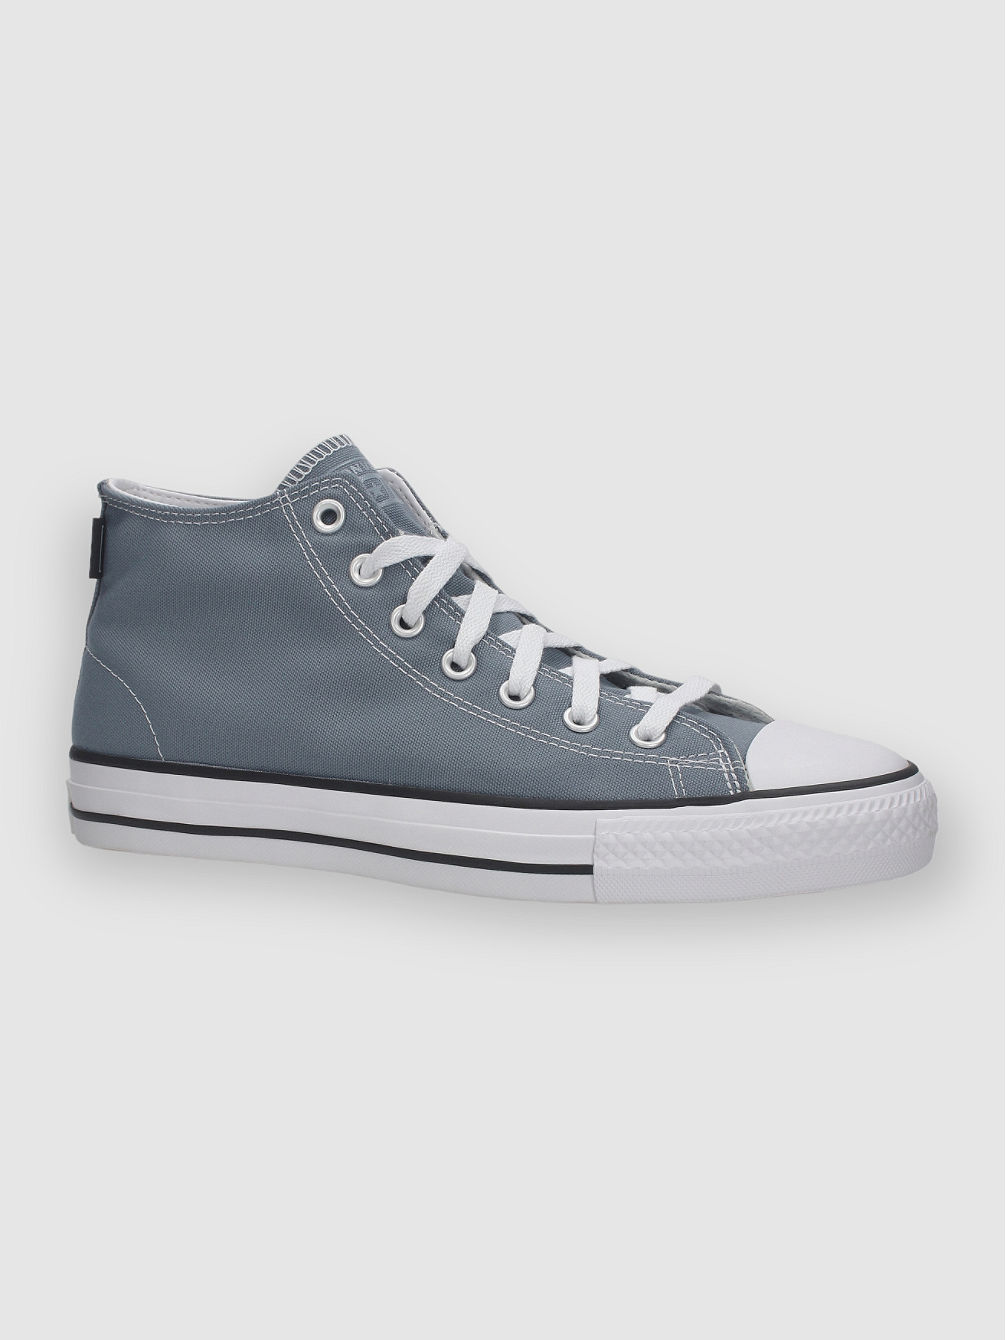 Cons Chuck Taylor All Star Pro Chaussures de skate